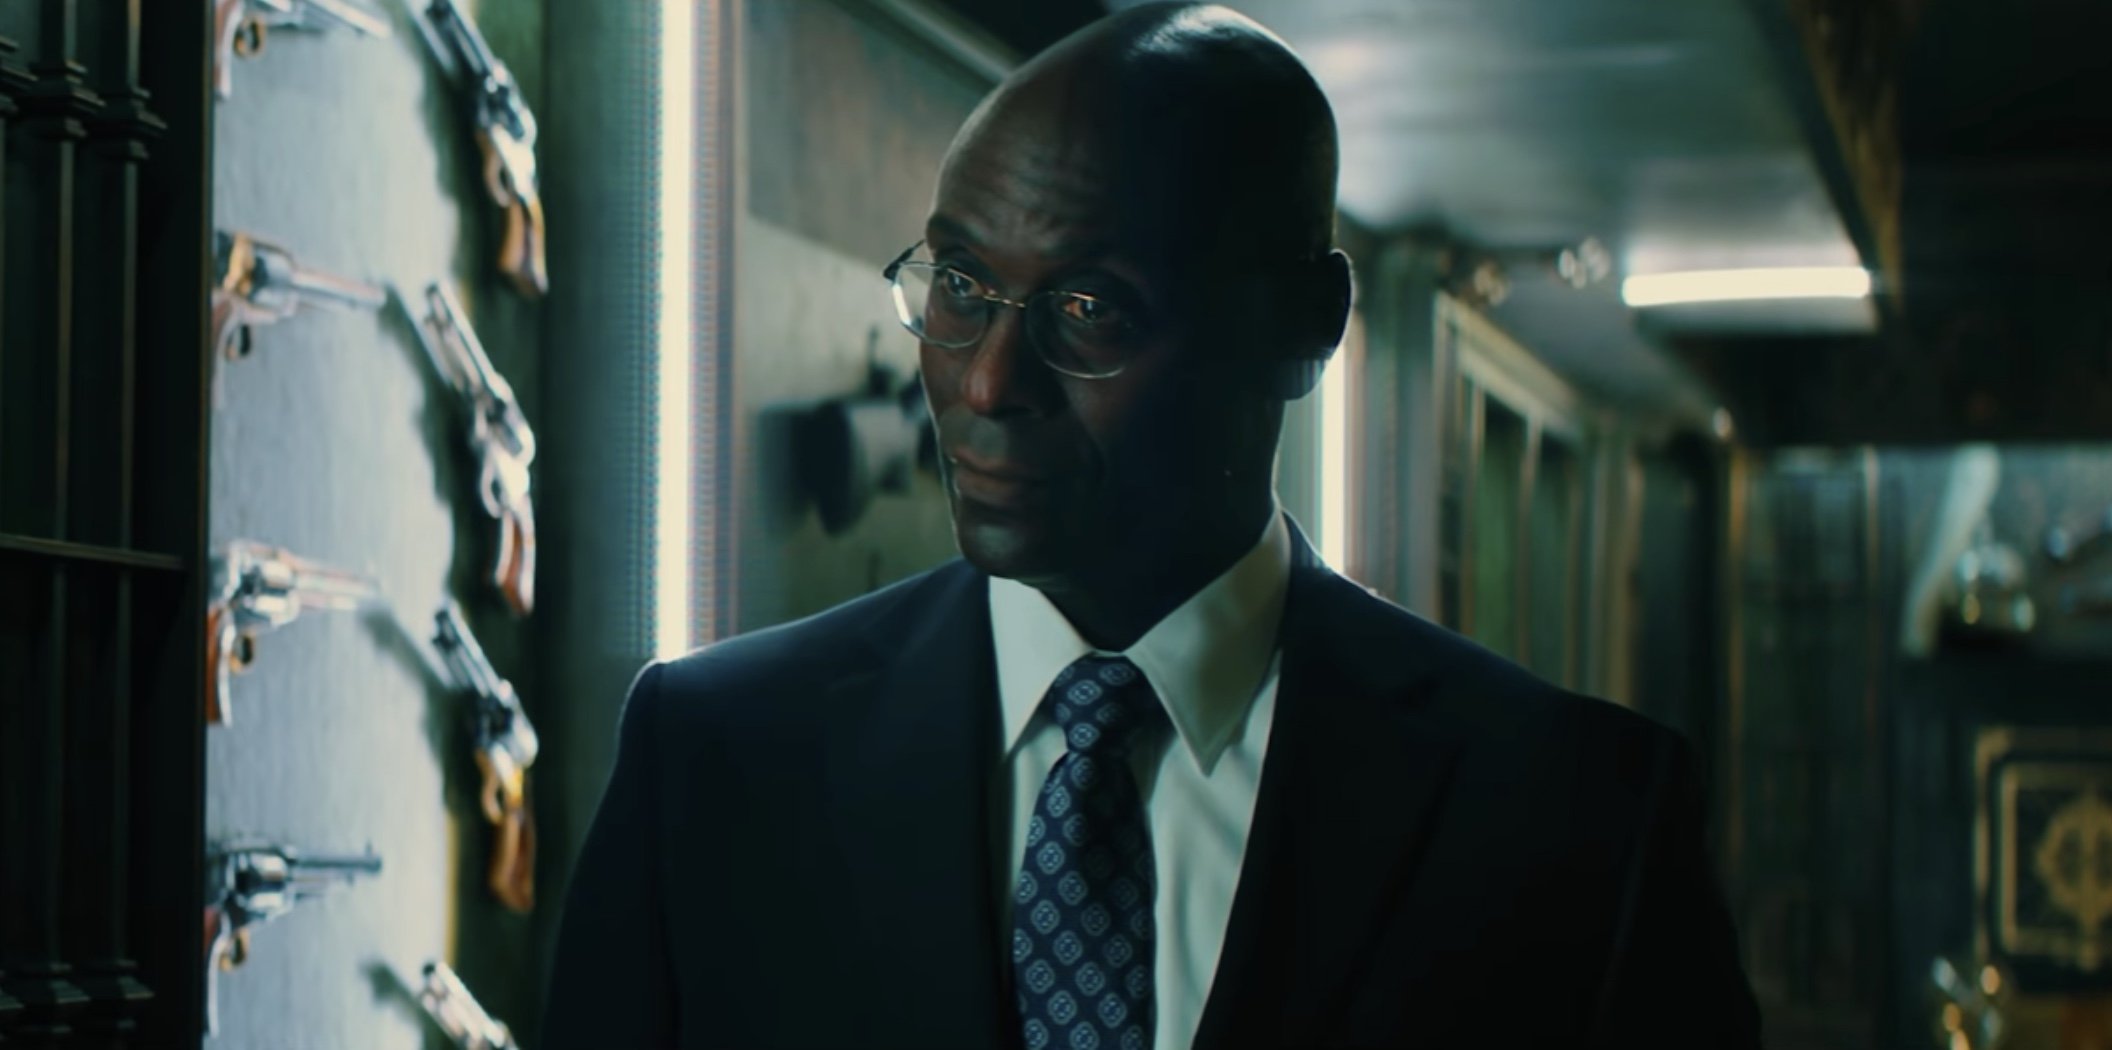 Lance Reddick, John Wick and The Wire star, dies at 60